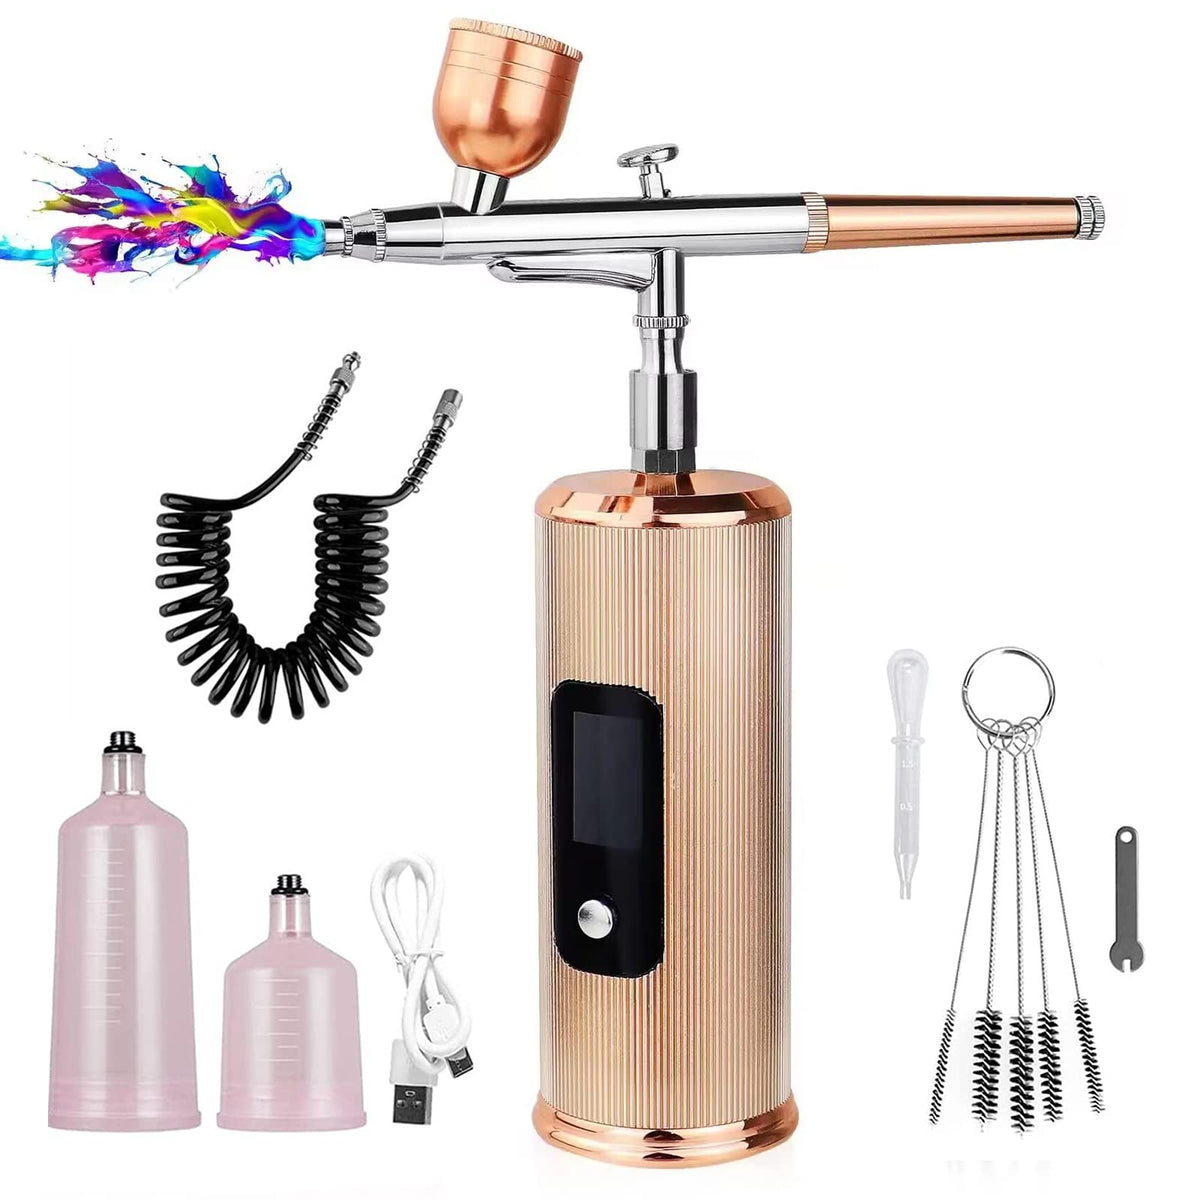 Airbrush Kit with Compressor,Cordless Air Brush Set for Painting,32  PSI,Gravity Feeding,0.3 mm Tip,3 levels, Ideal for